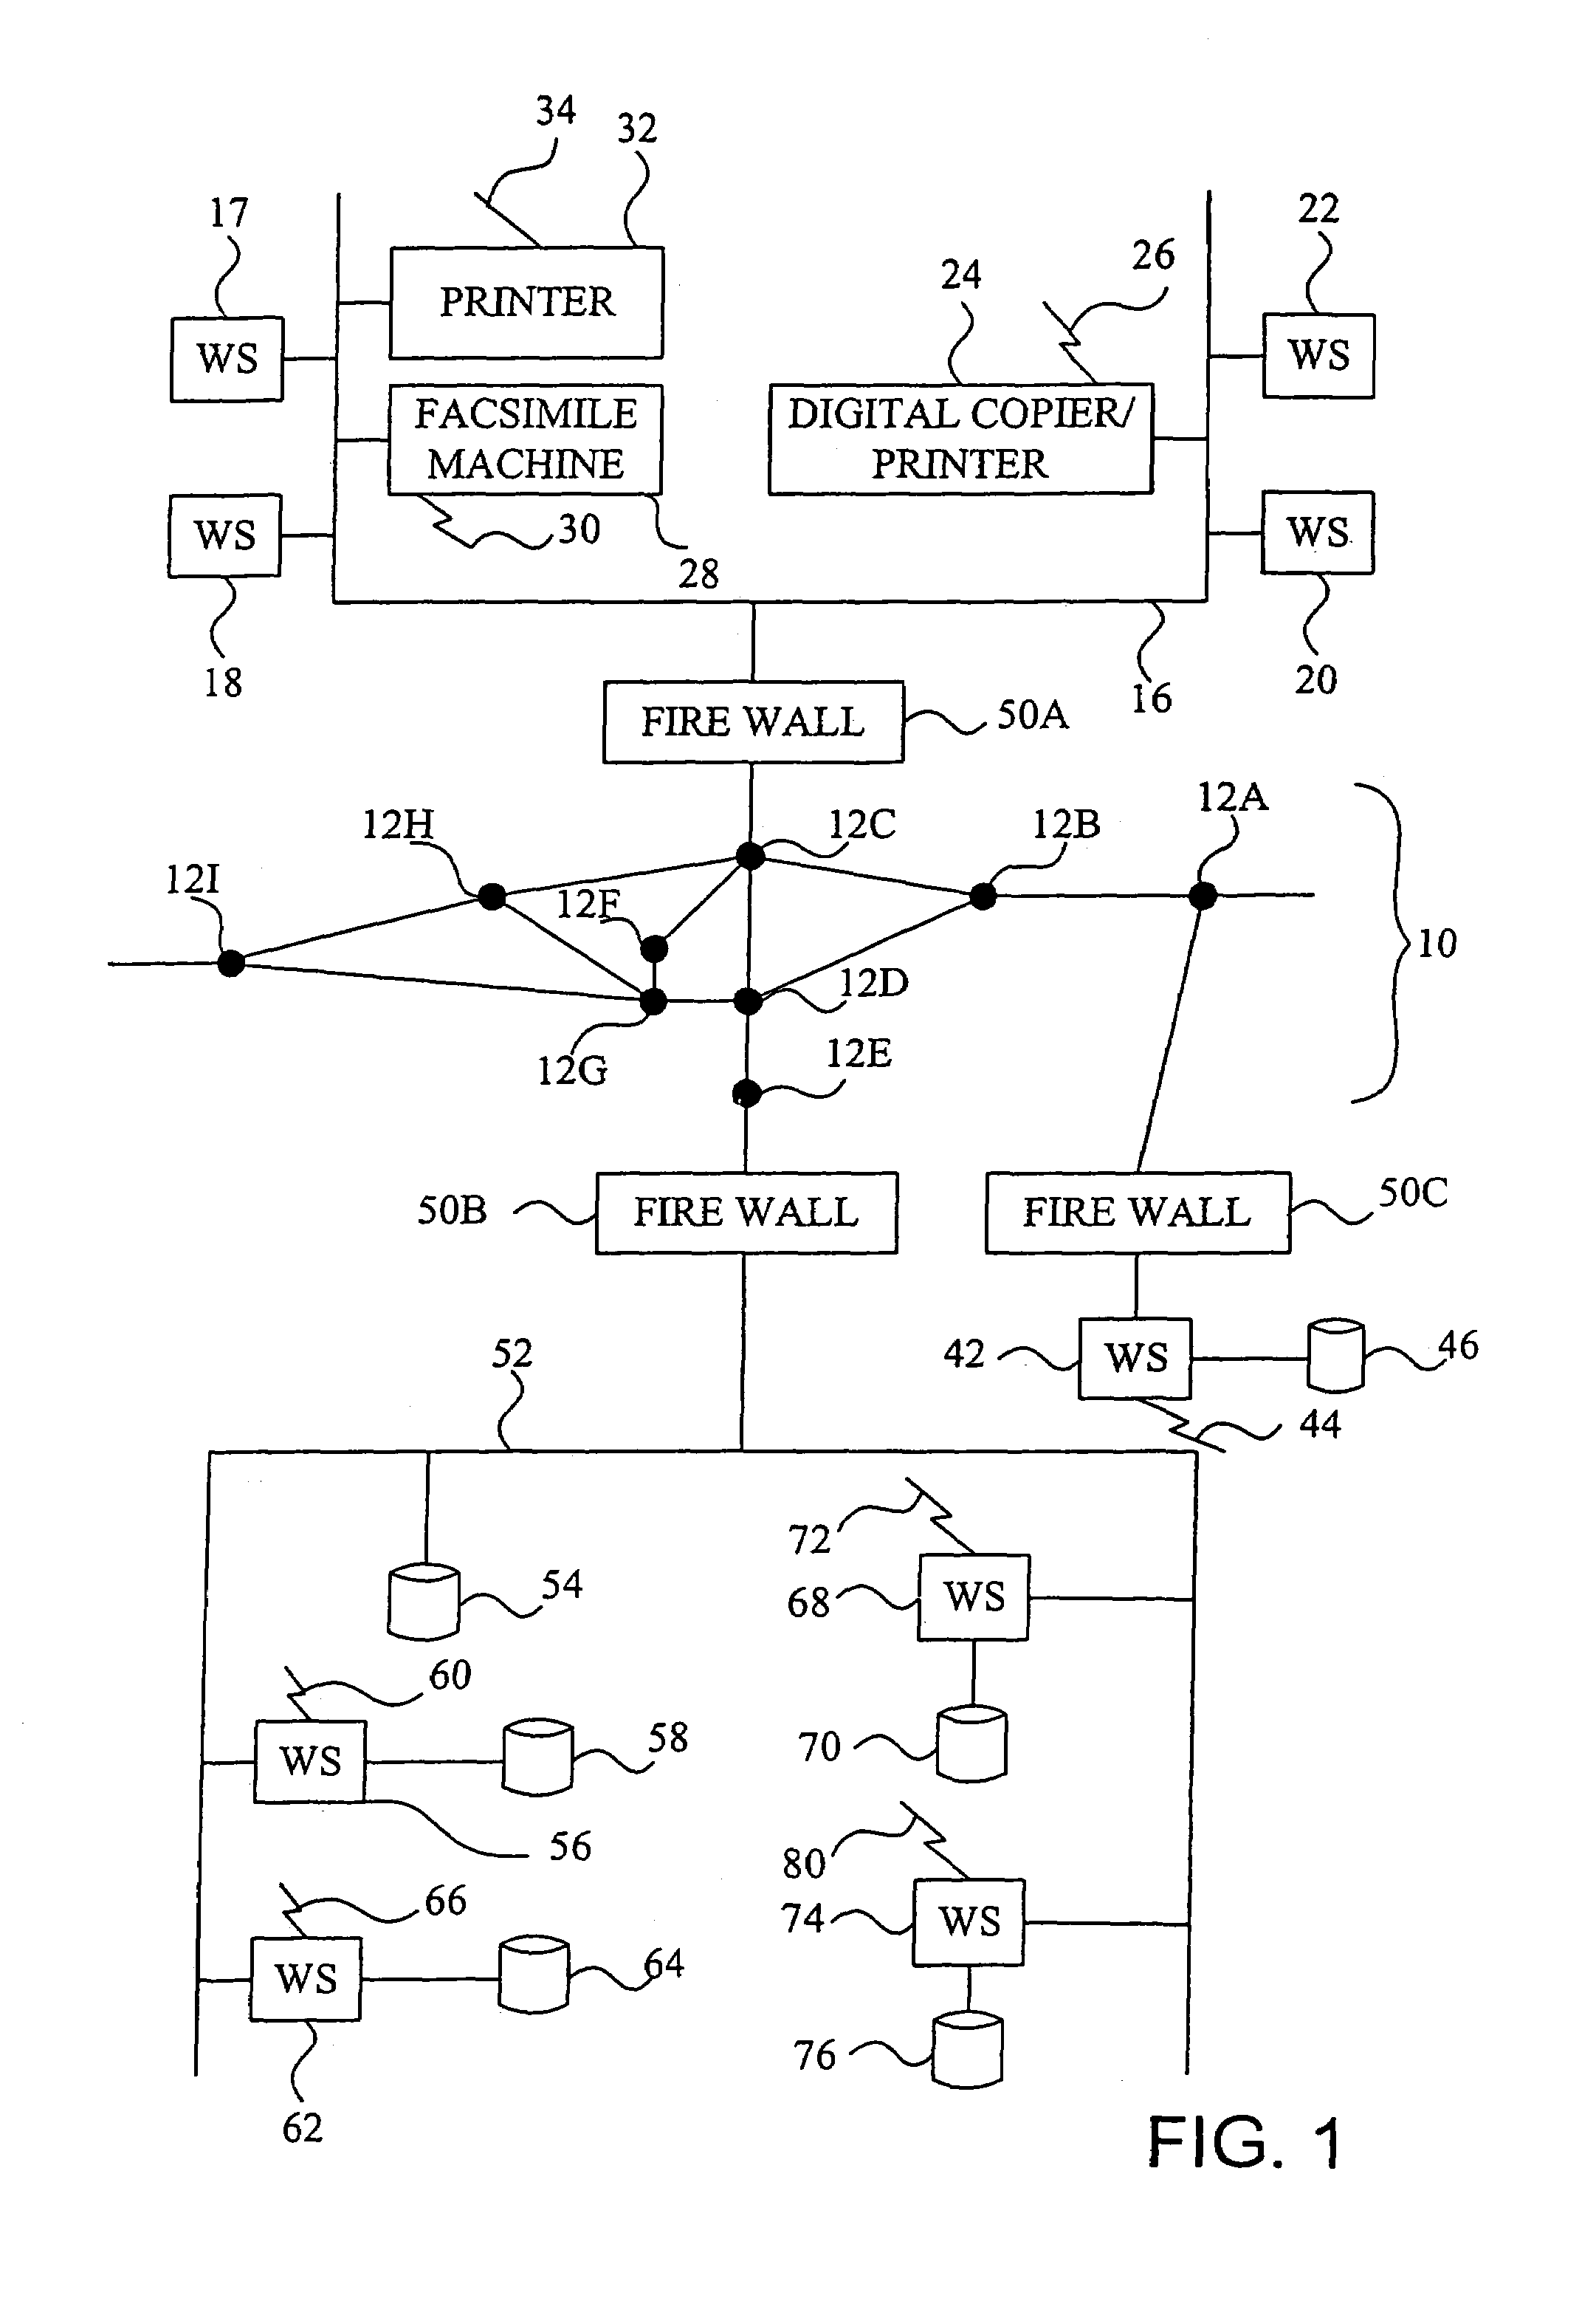 Method and system of remote diagnostic, control and information collection using multiple formats and multiple protocols with delegating protocol processor